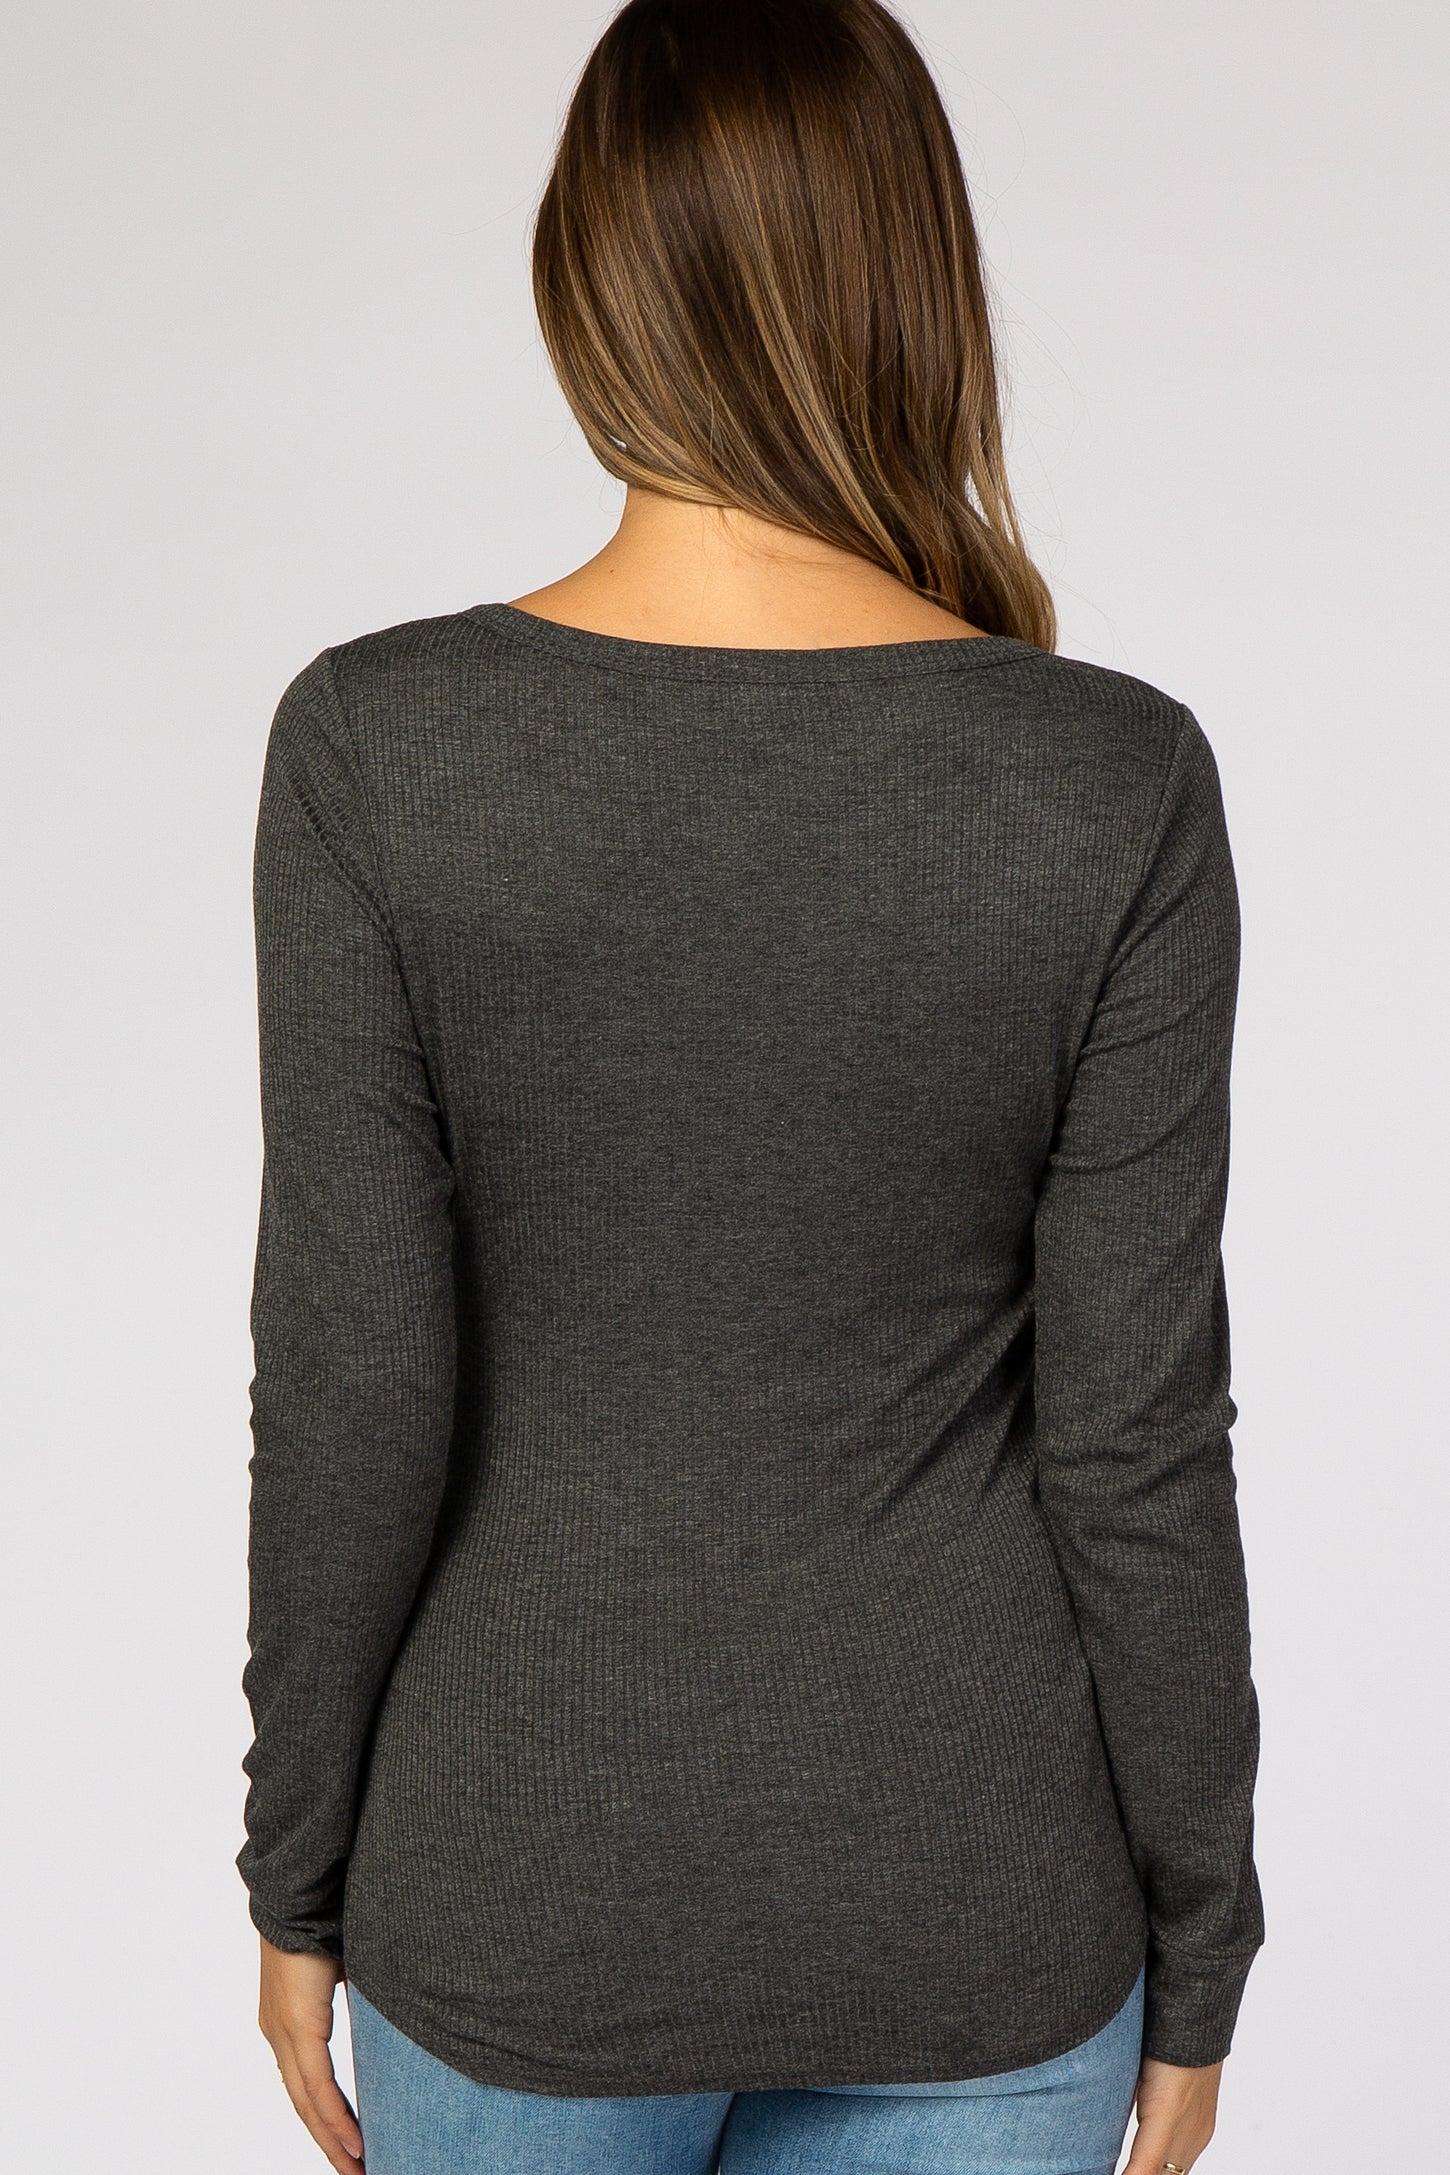 Charcoal Ribbed Button Front Maternity Top